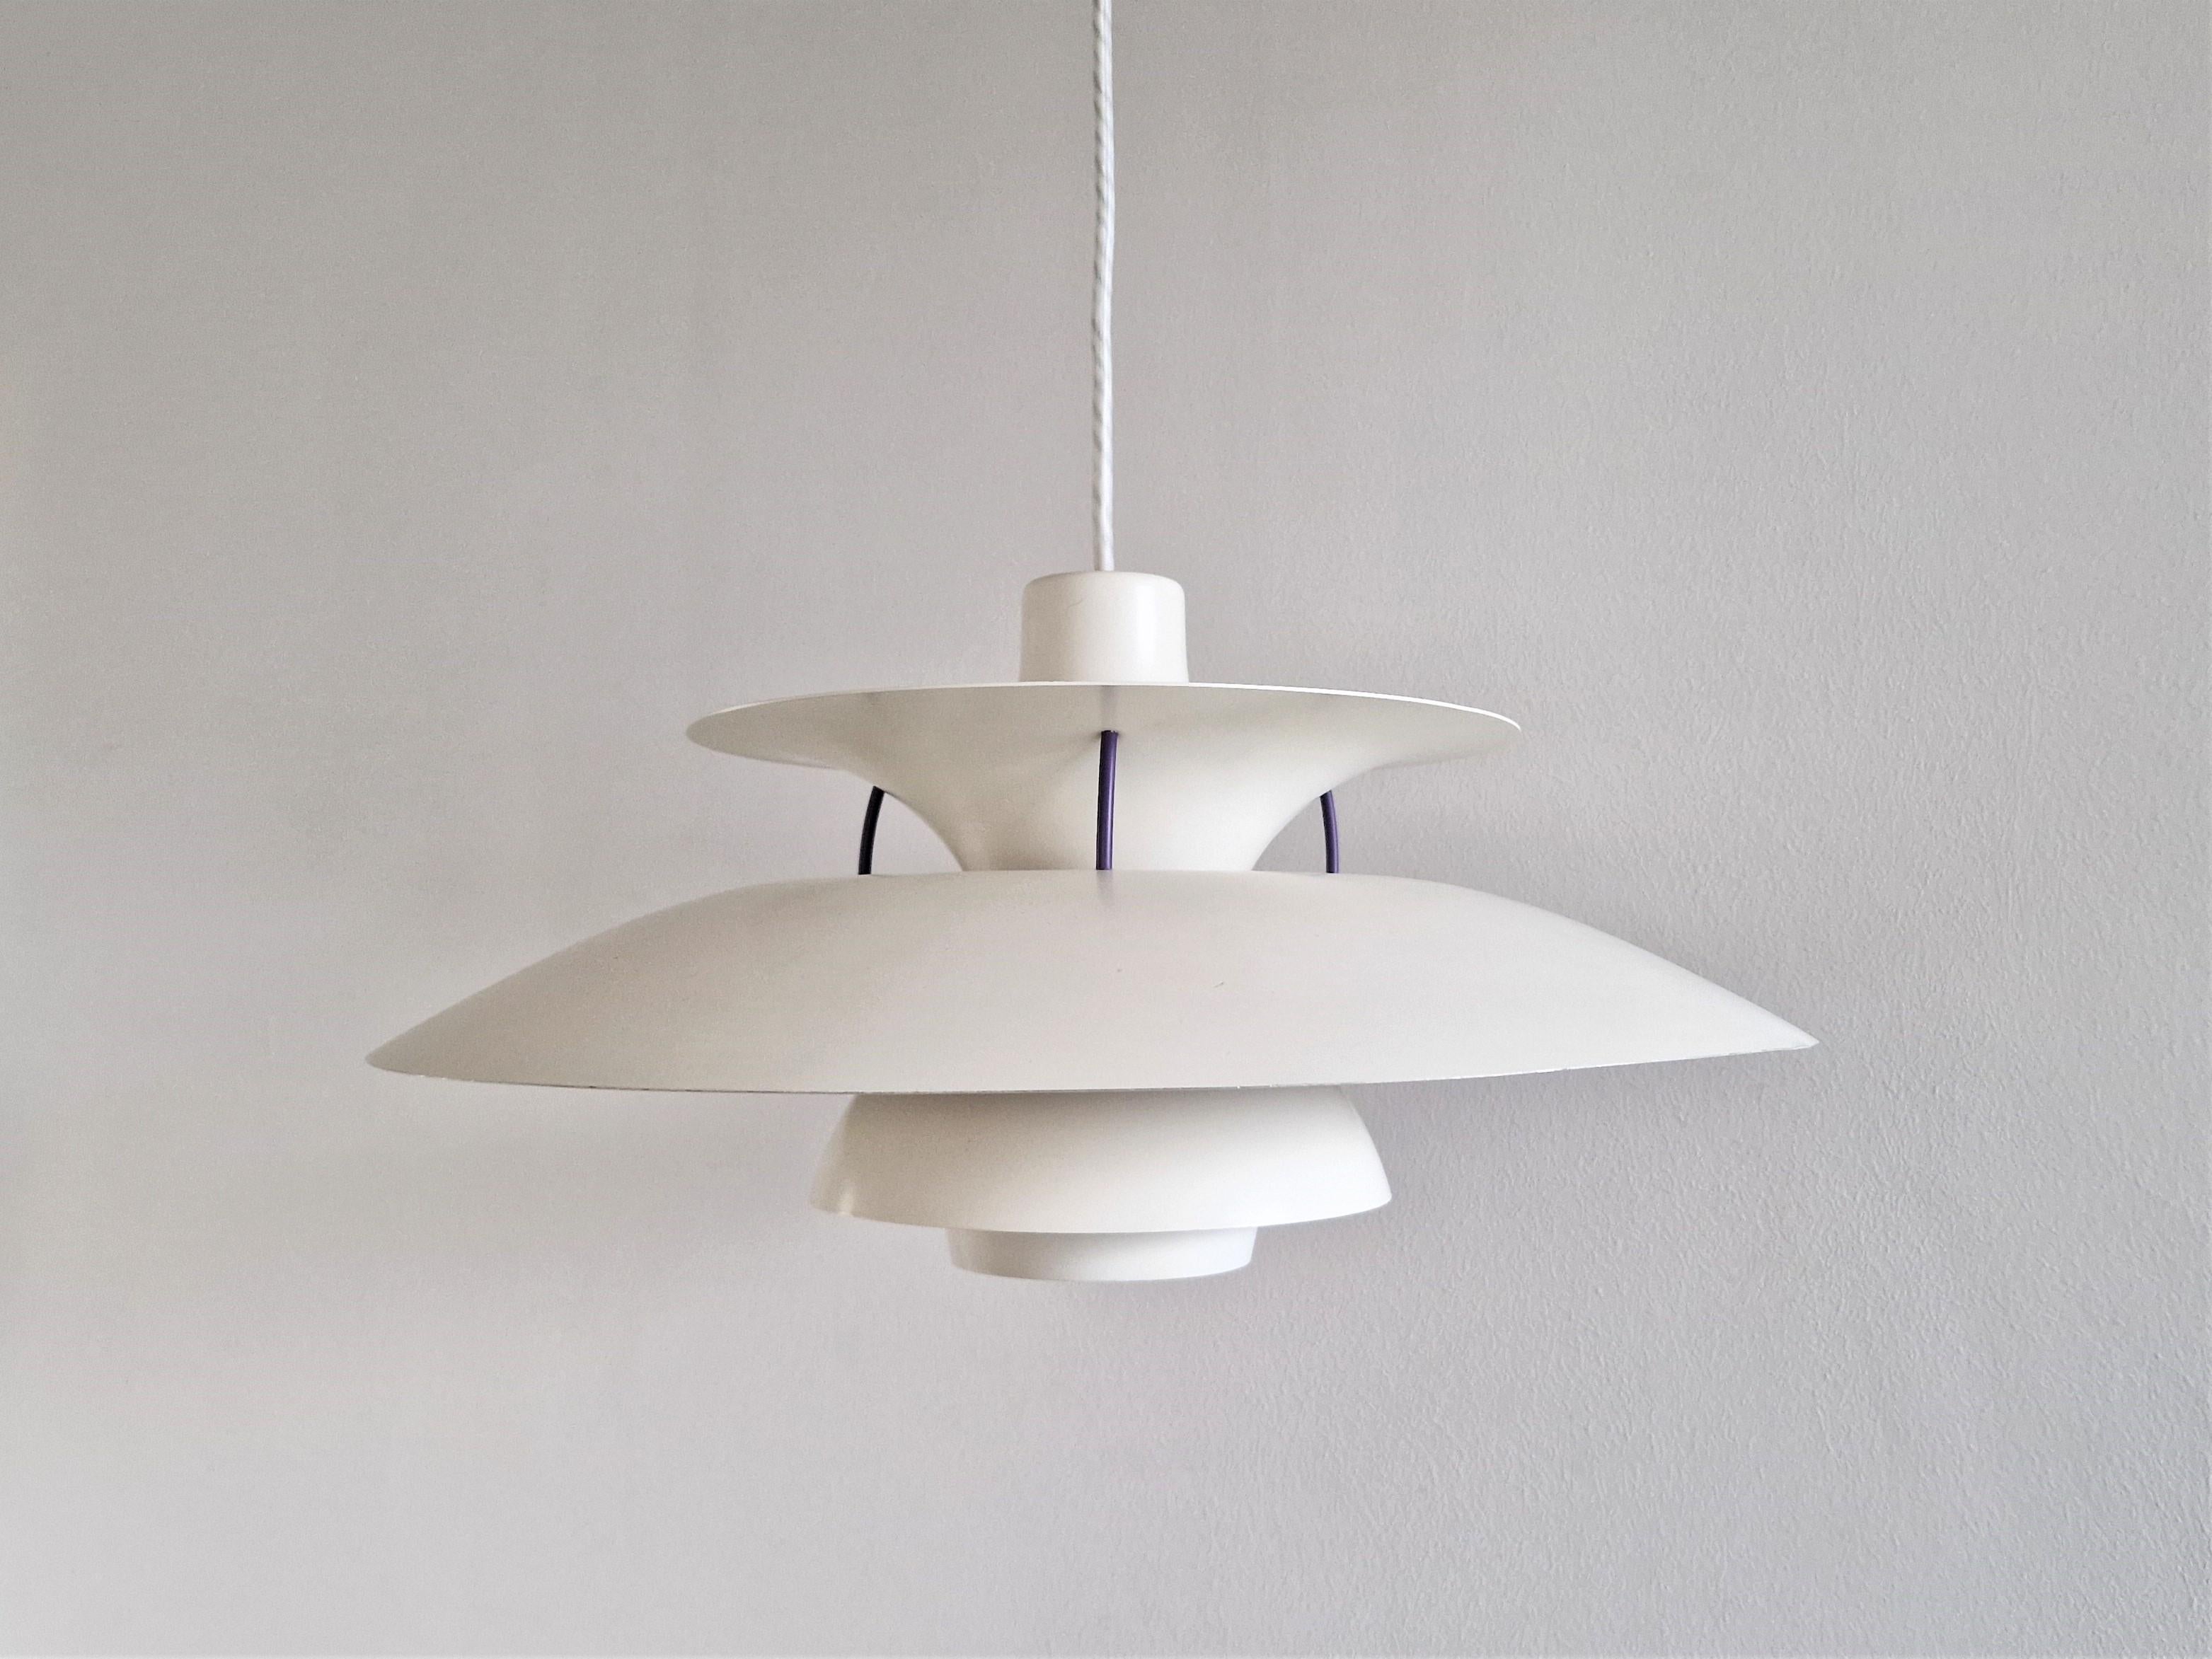 This timeless model PH5 pendant lamp was designed by Poul Henningsen for Louis Poulsen in 1956. The lamp has a white shade with blue and red details and blue connecting elements. It is in a very good condition with signs of age and use and it is